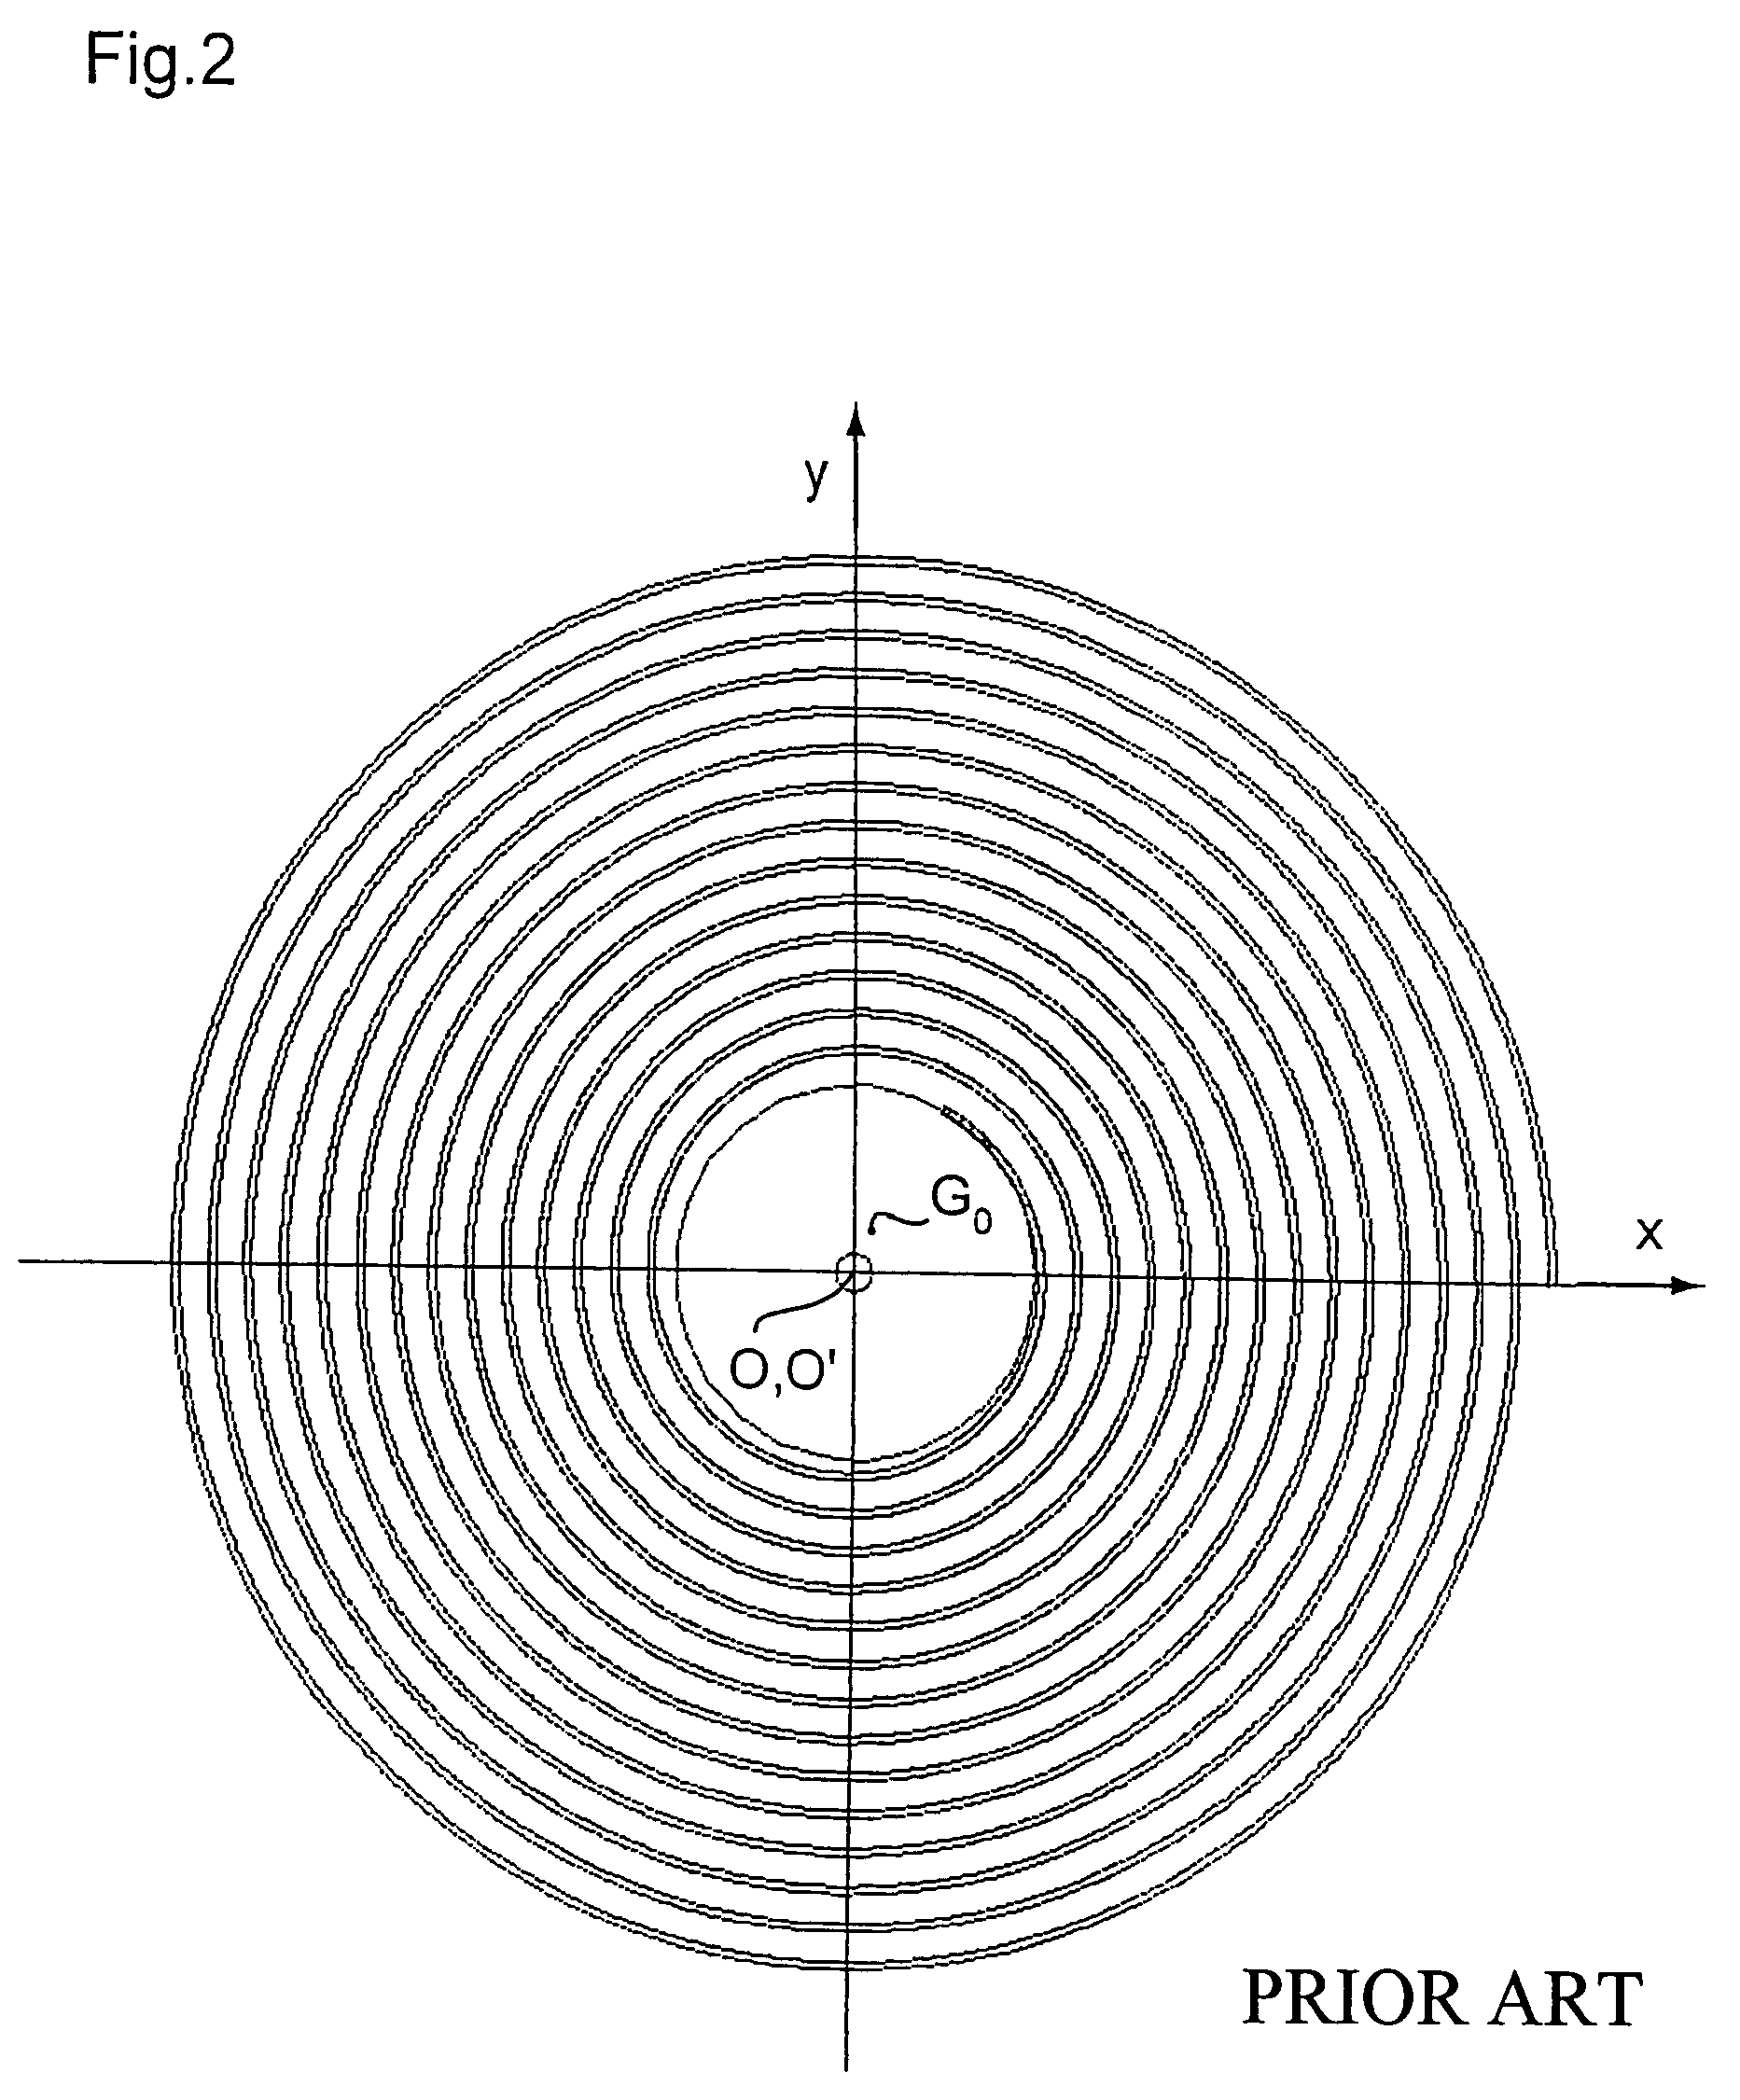 Control member with a balance wheel and a planar spiral for a watch or clock movement